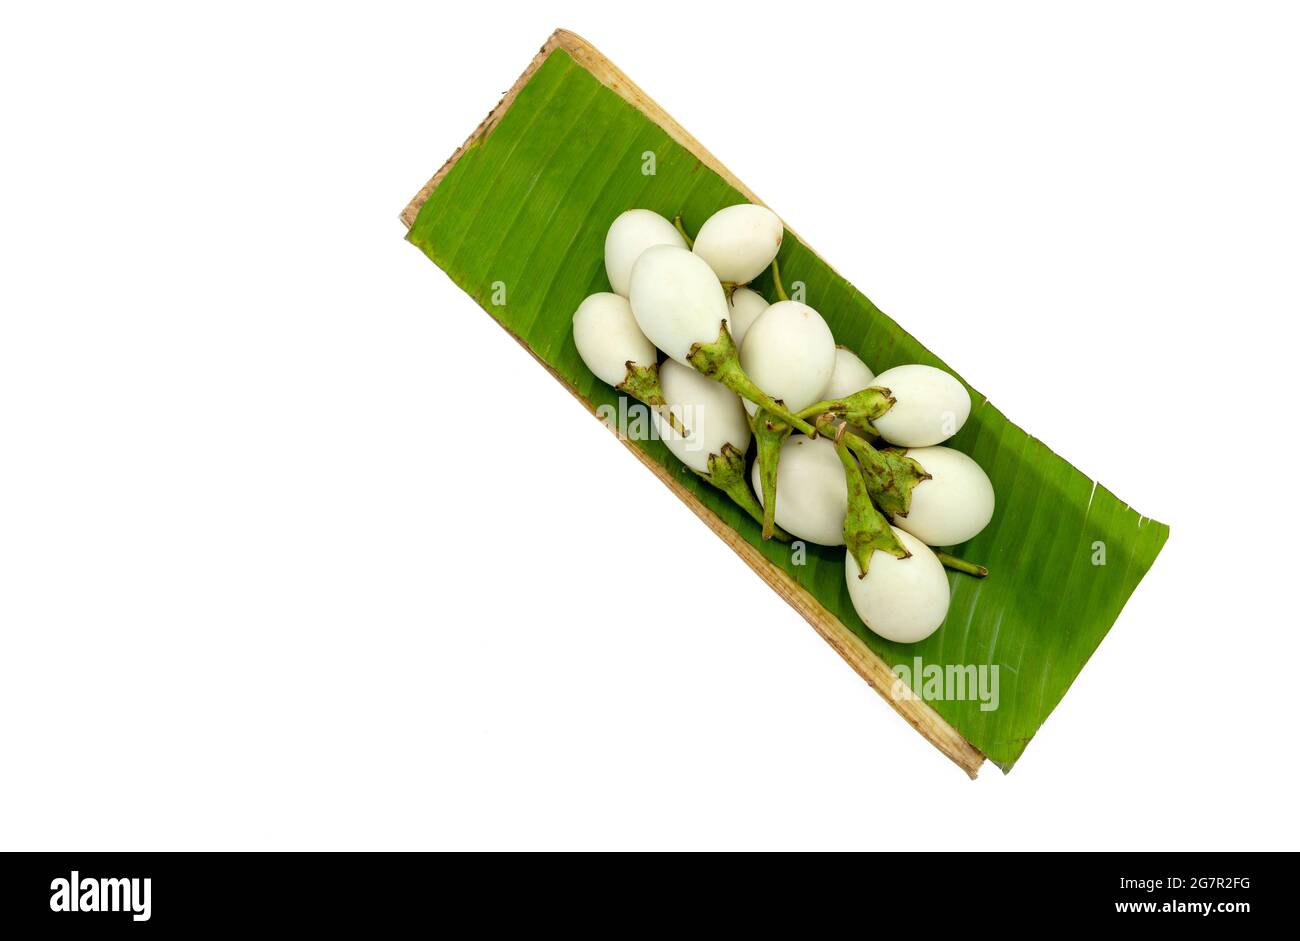 Top view white eggplant or Aubergine in a tray of banana leaf for sale on white background. Isolated white eggplant or Aubergine in a tray of banana l Stock Photo